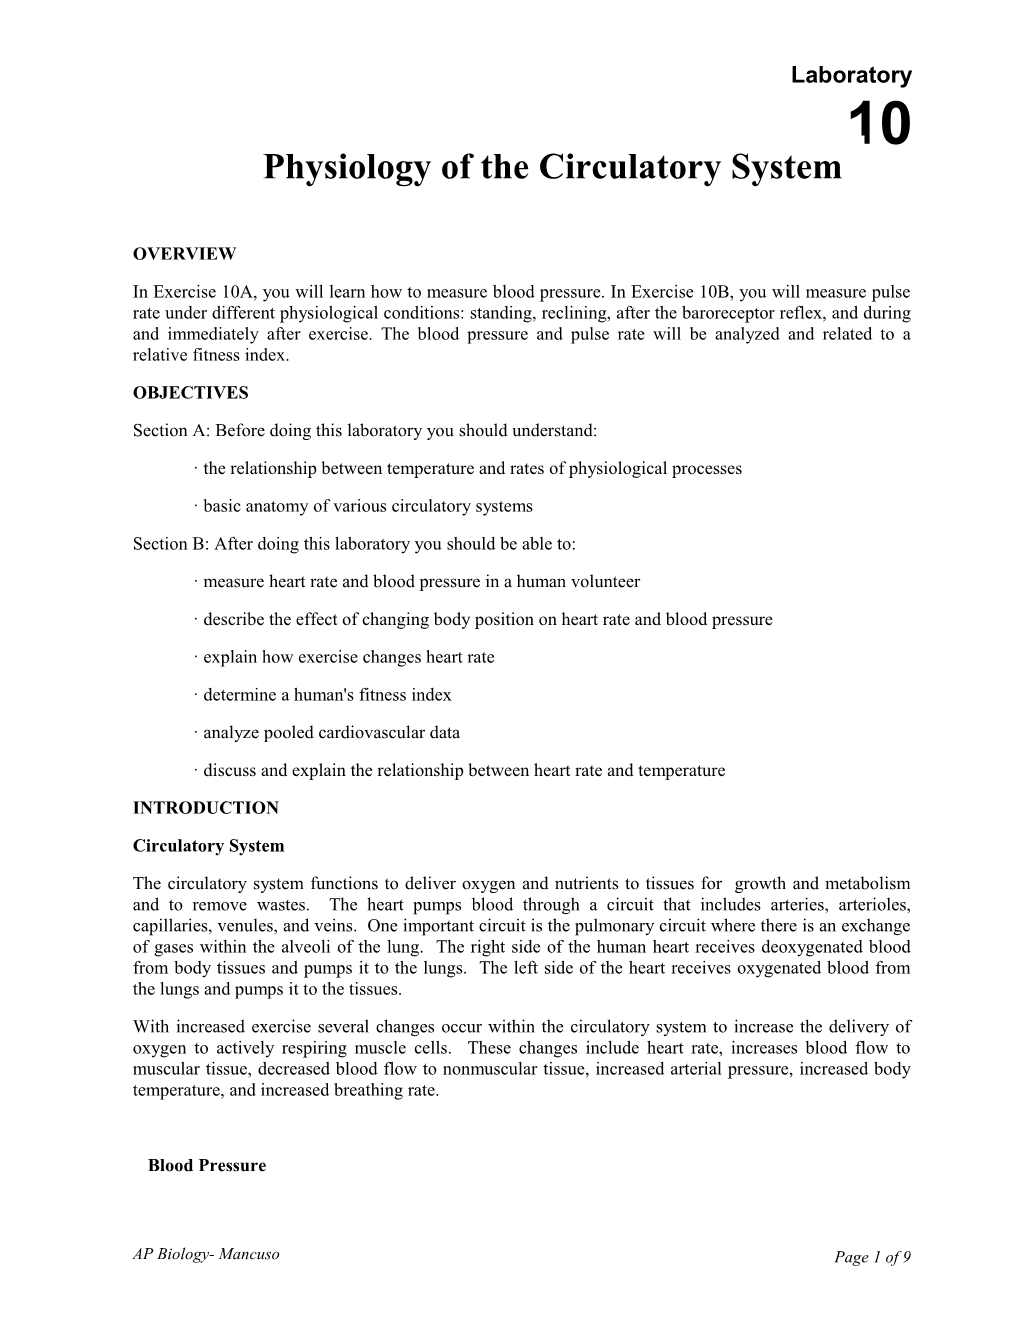 Lab 10: Physiology of the Circulatory System